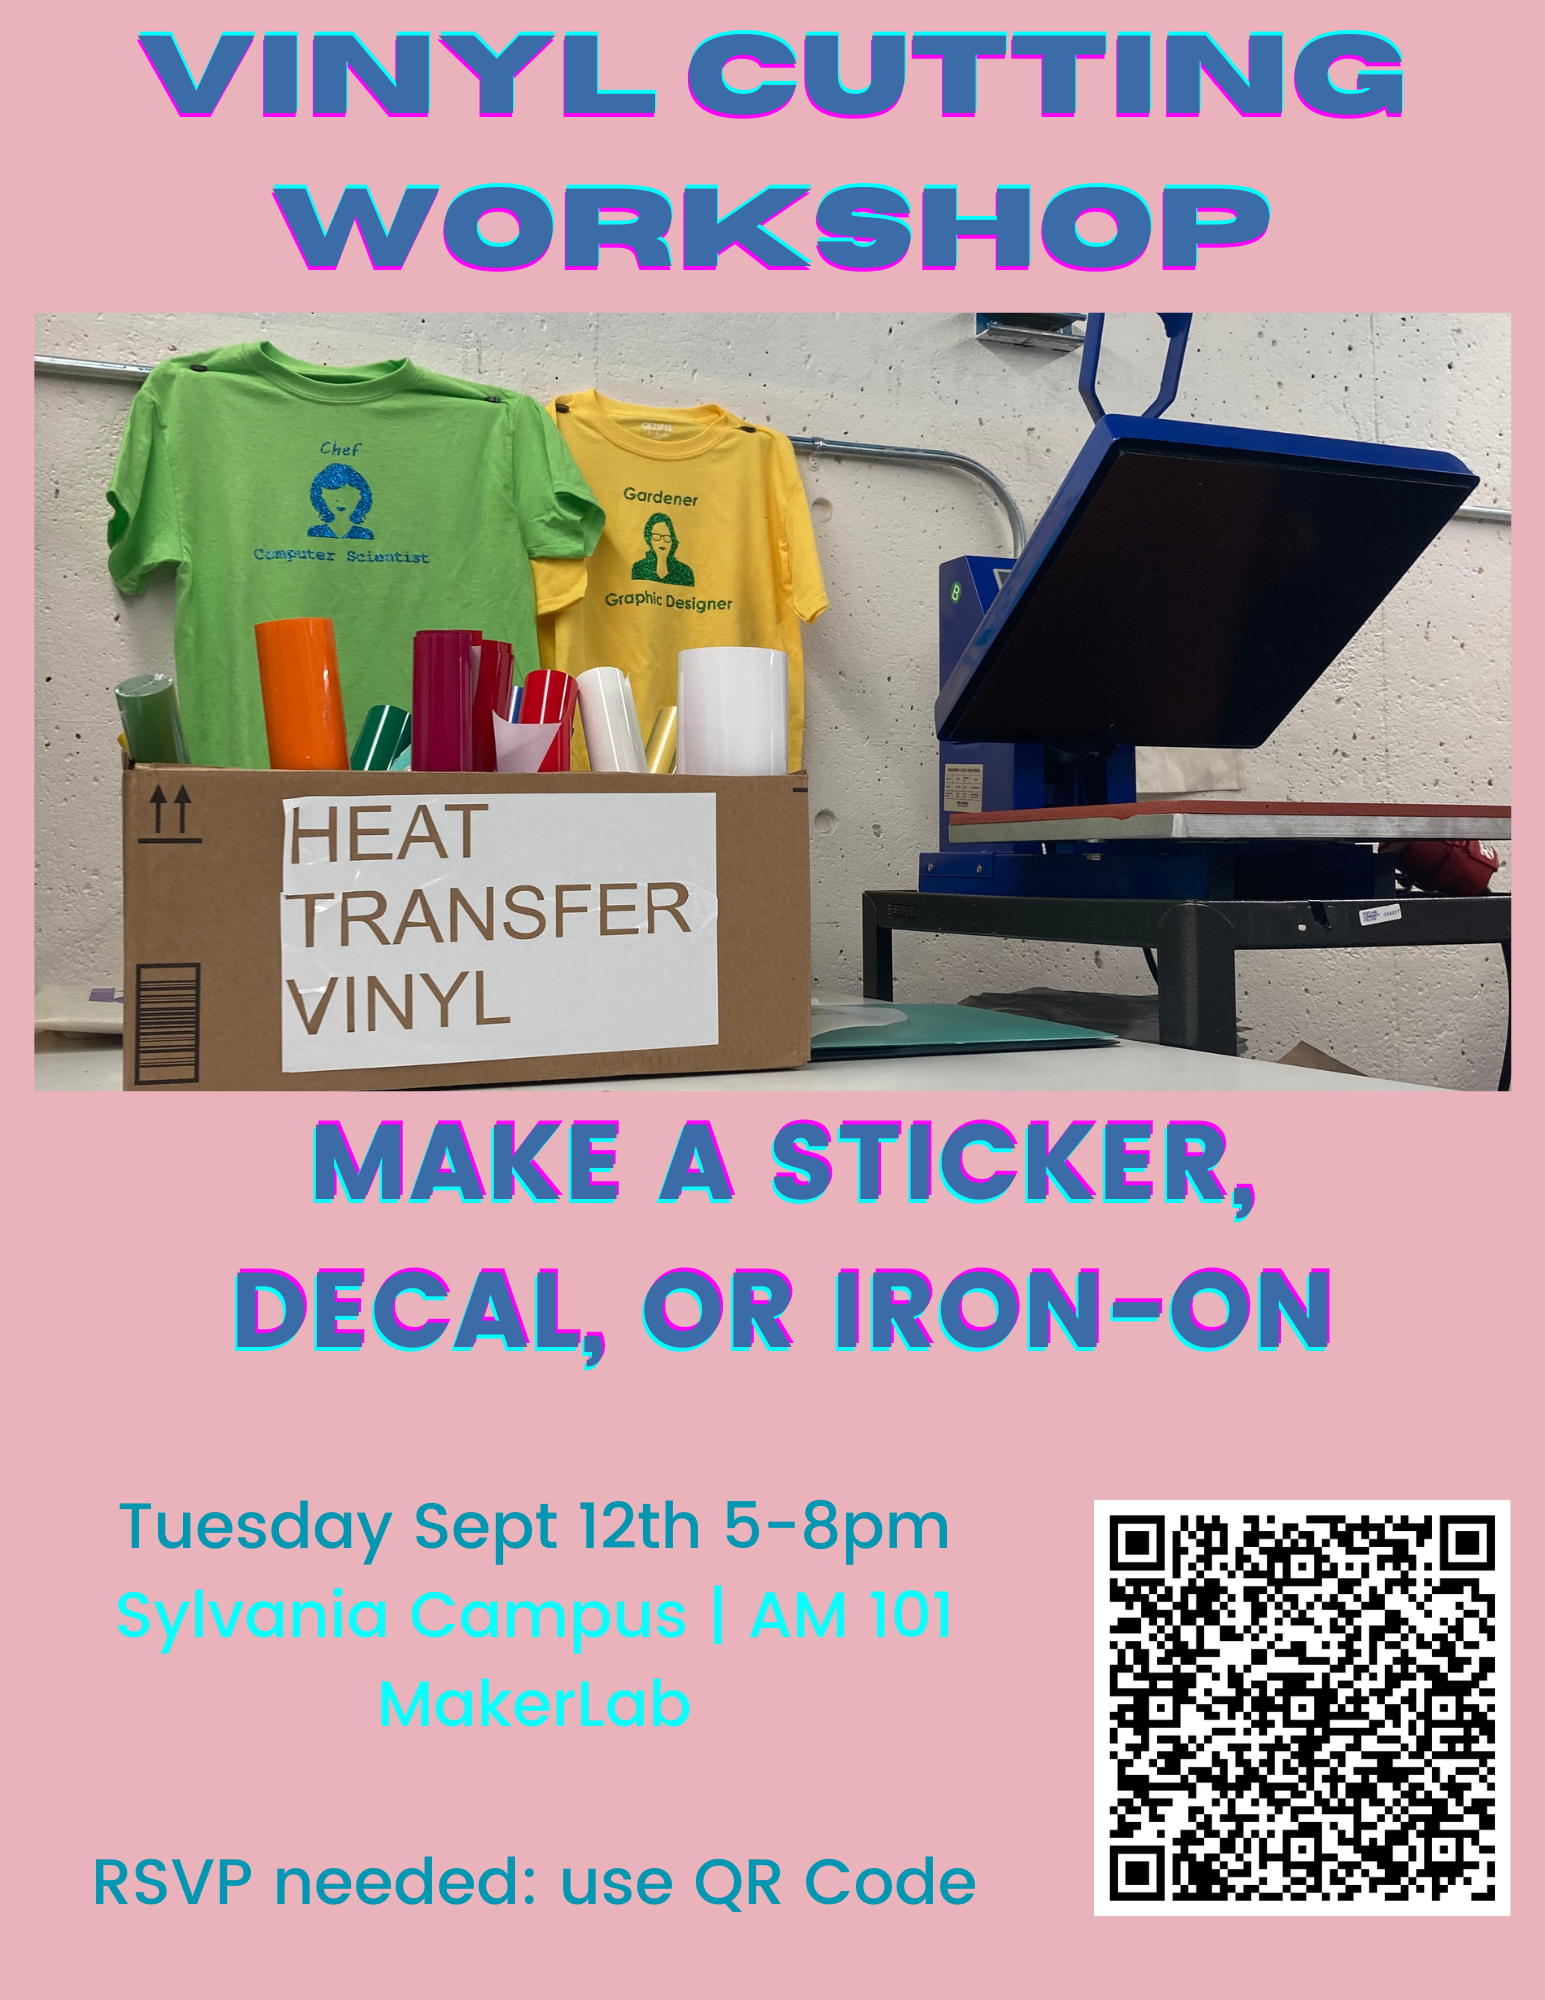 Sylvania MakerLab Vinyl Cutting Workshop - Tuesday, September 12th | Vinyl Cutting Workshop. | Make a sticker, decal, or iron-on. | Tuesday September 12th from 5 to 8pm. | Location MakerLab at Sylvania Campus | AM 101. | RSVP needed. | Use QR code.